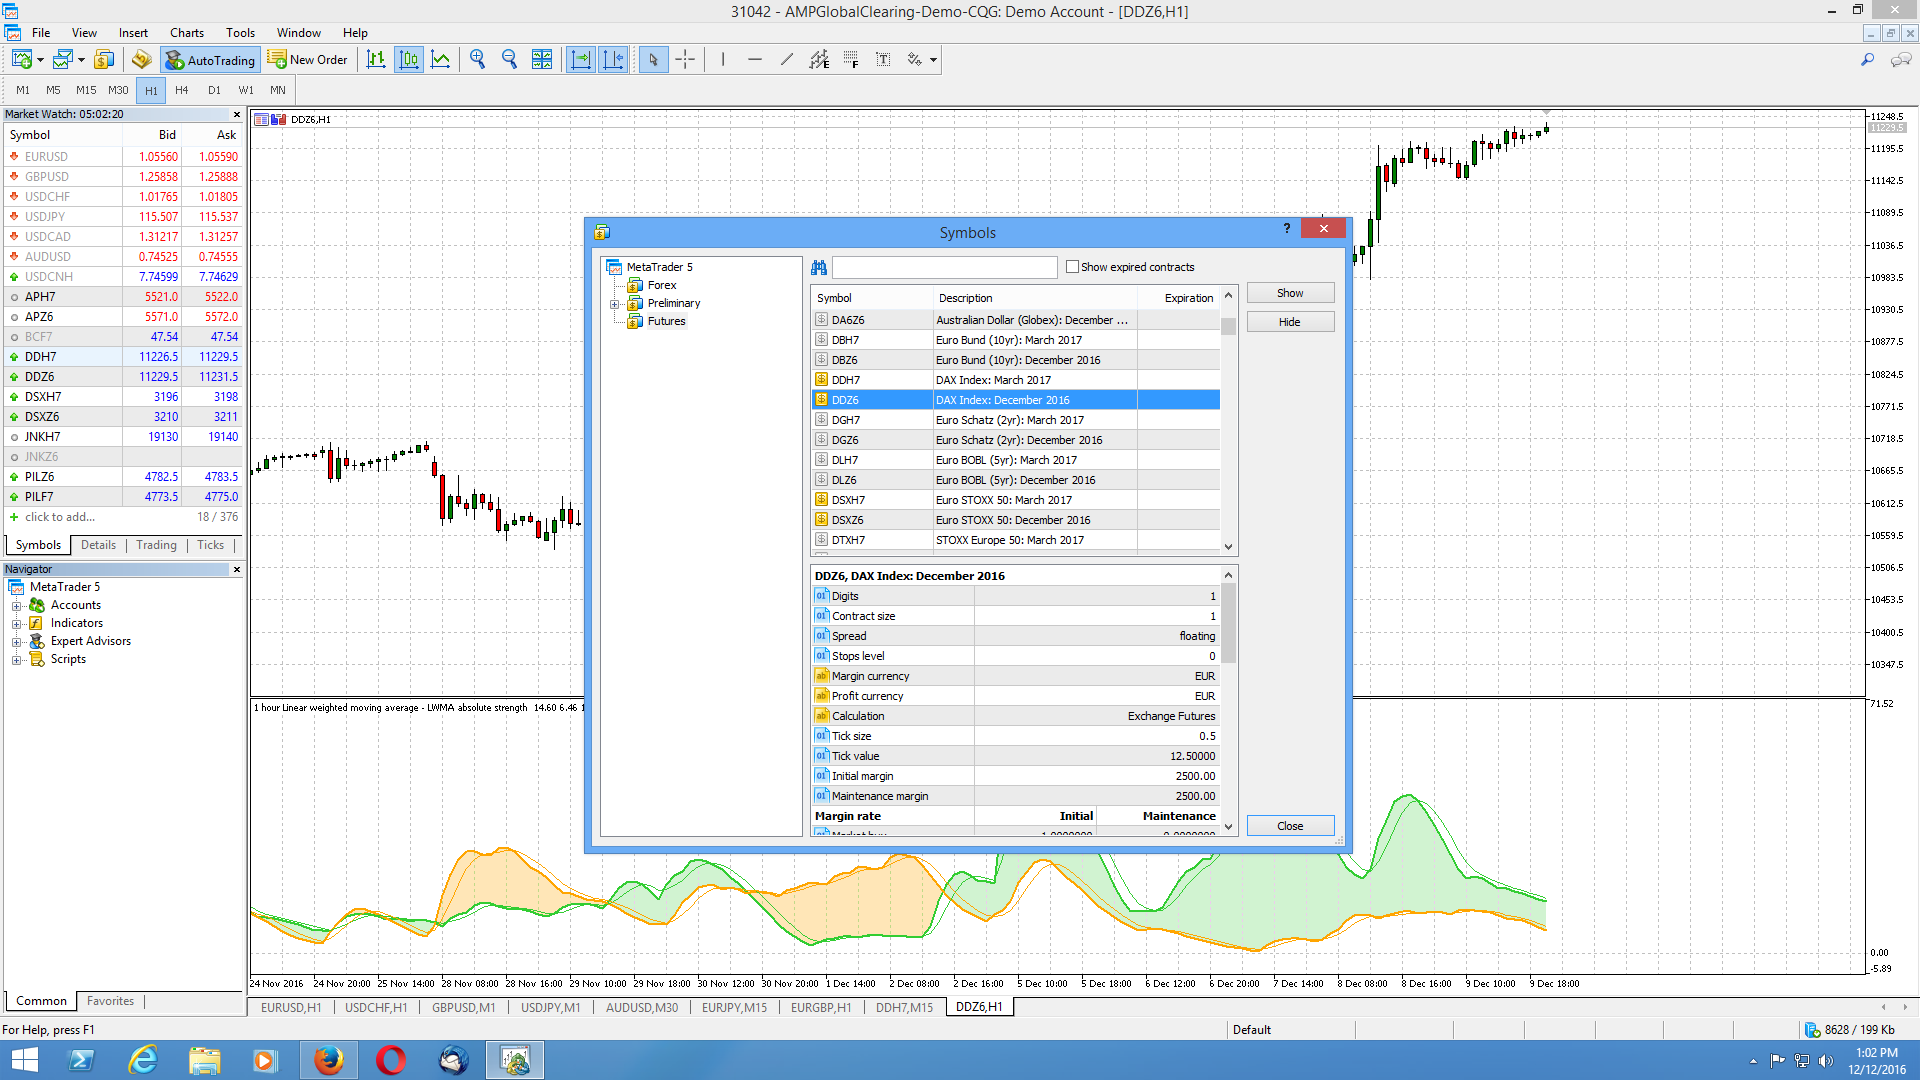 Dax future real-time data - Forex News - Trading stocks, futures, options and other exchange instruments - MQL5 forum Page 2